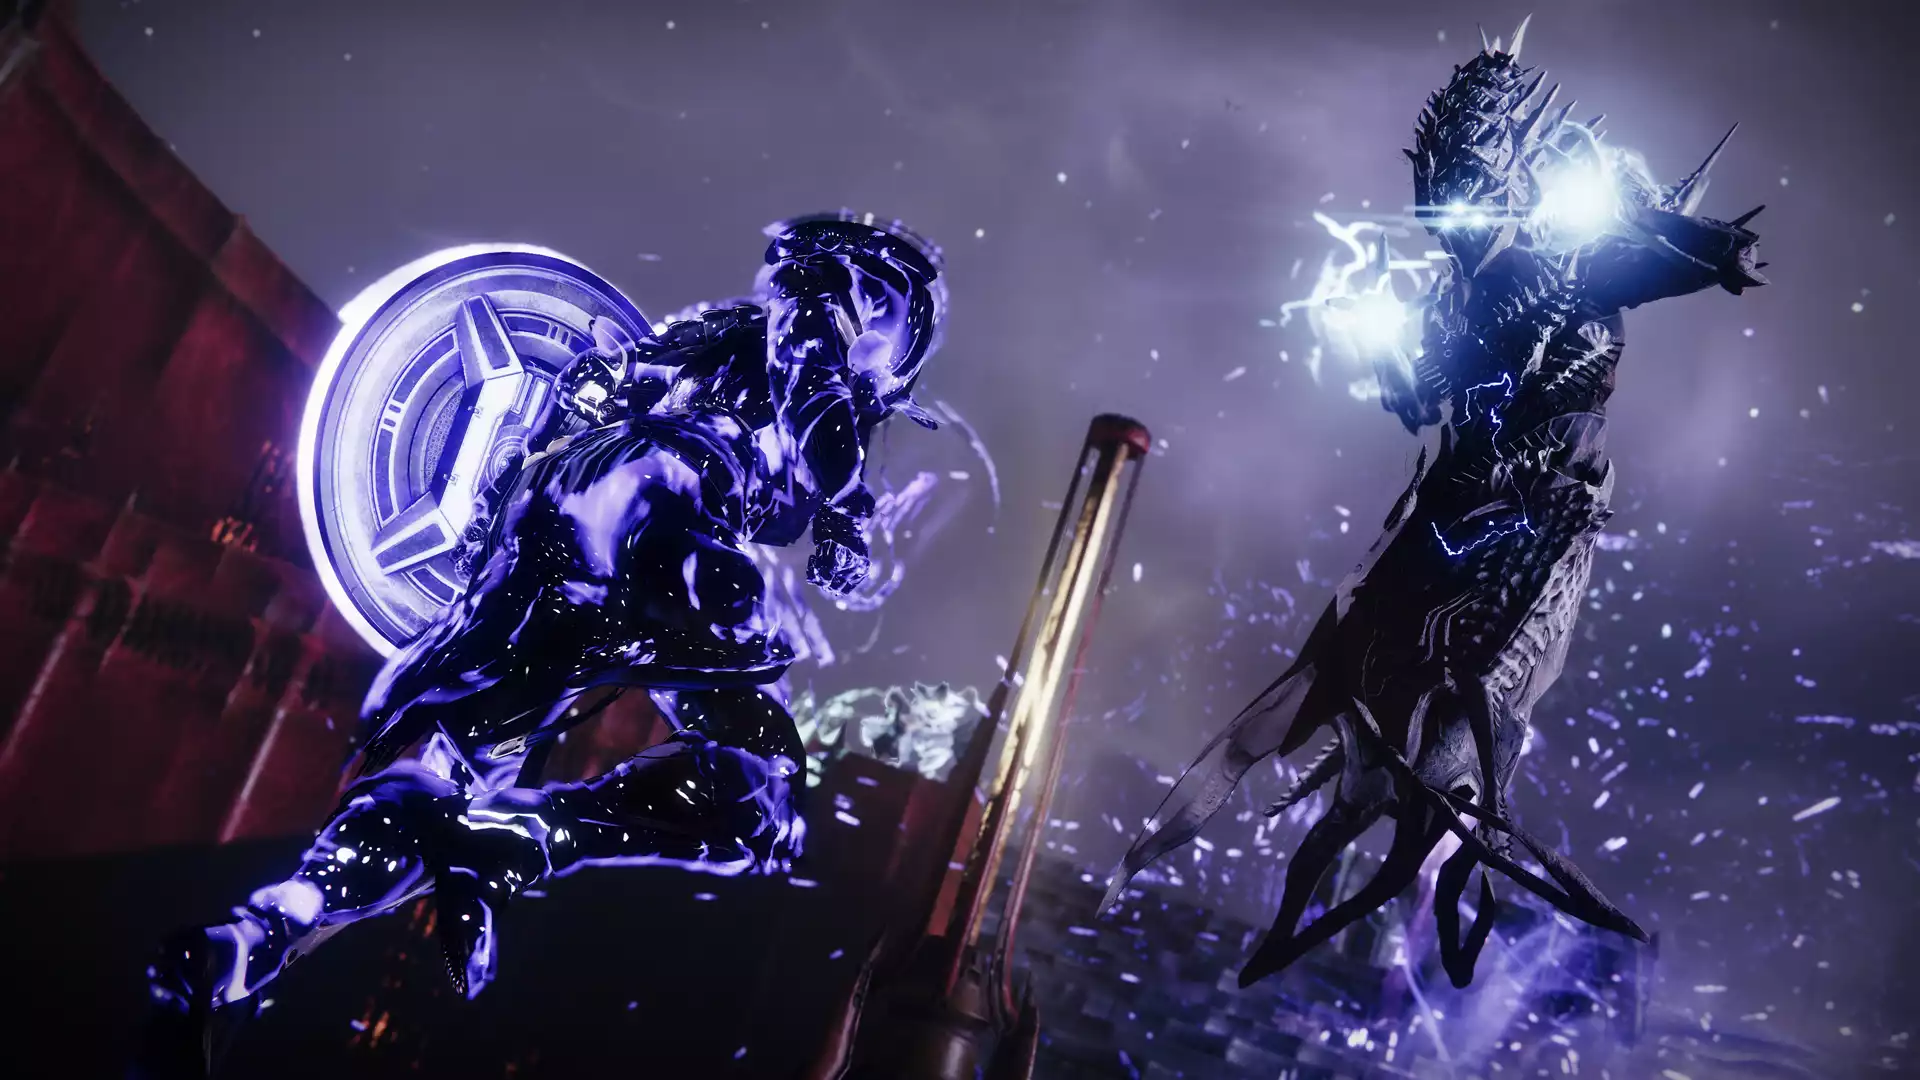 Destiny 2 Void 3.0 Explained: How The New Subclass System Works